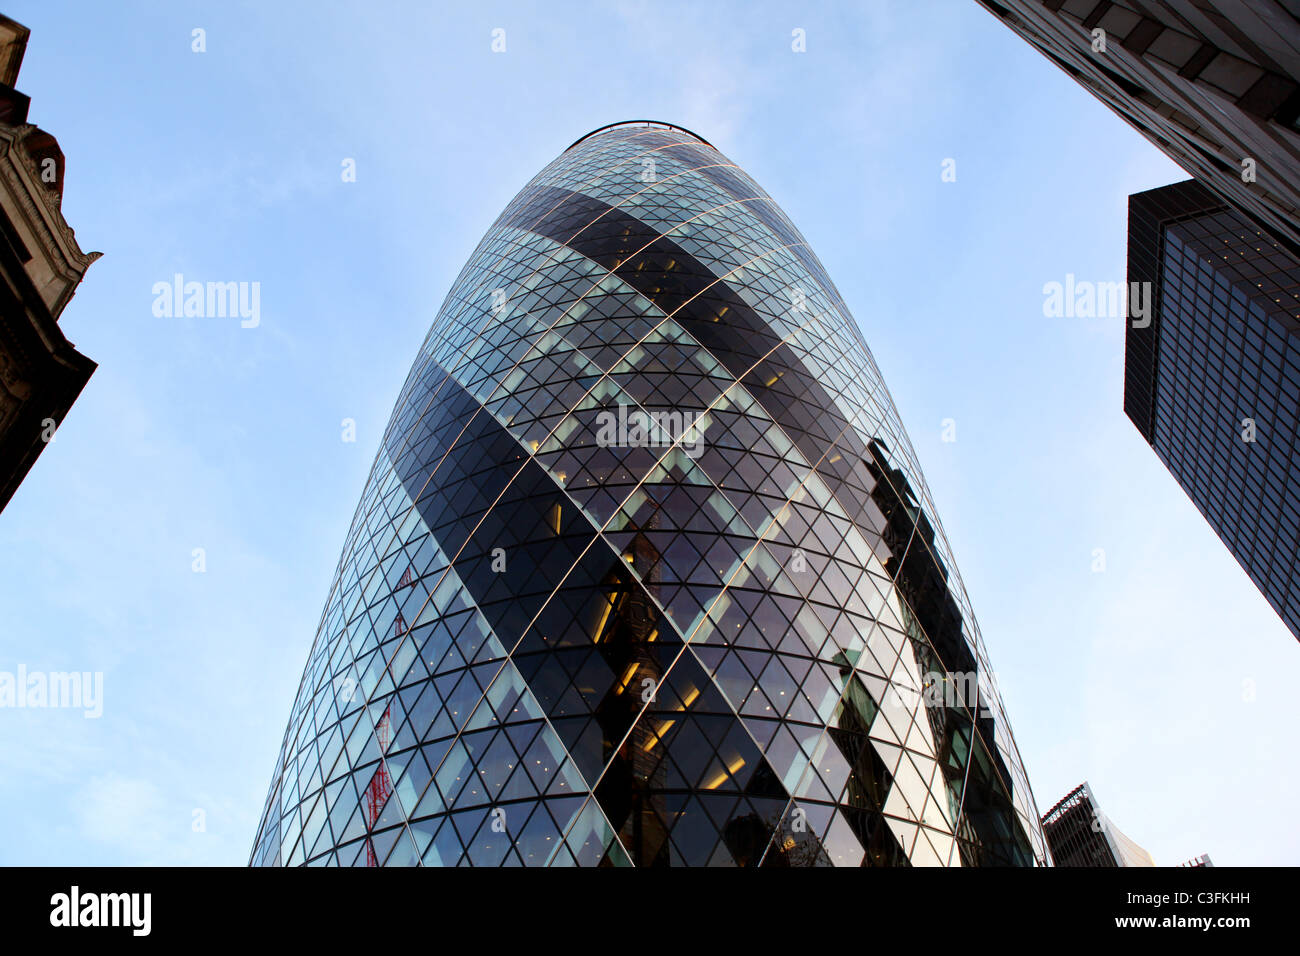 The Gherkin building, designed by Sir Norman Foster, near Liverpool street, London. Stock Photo